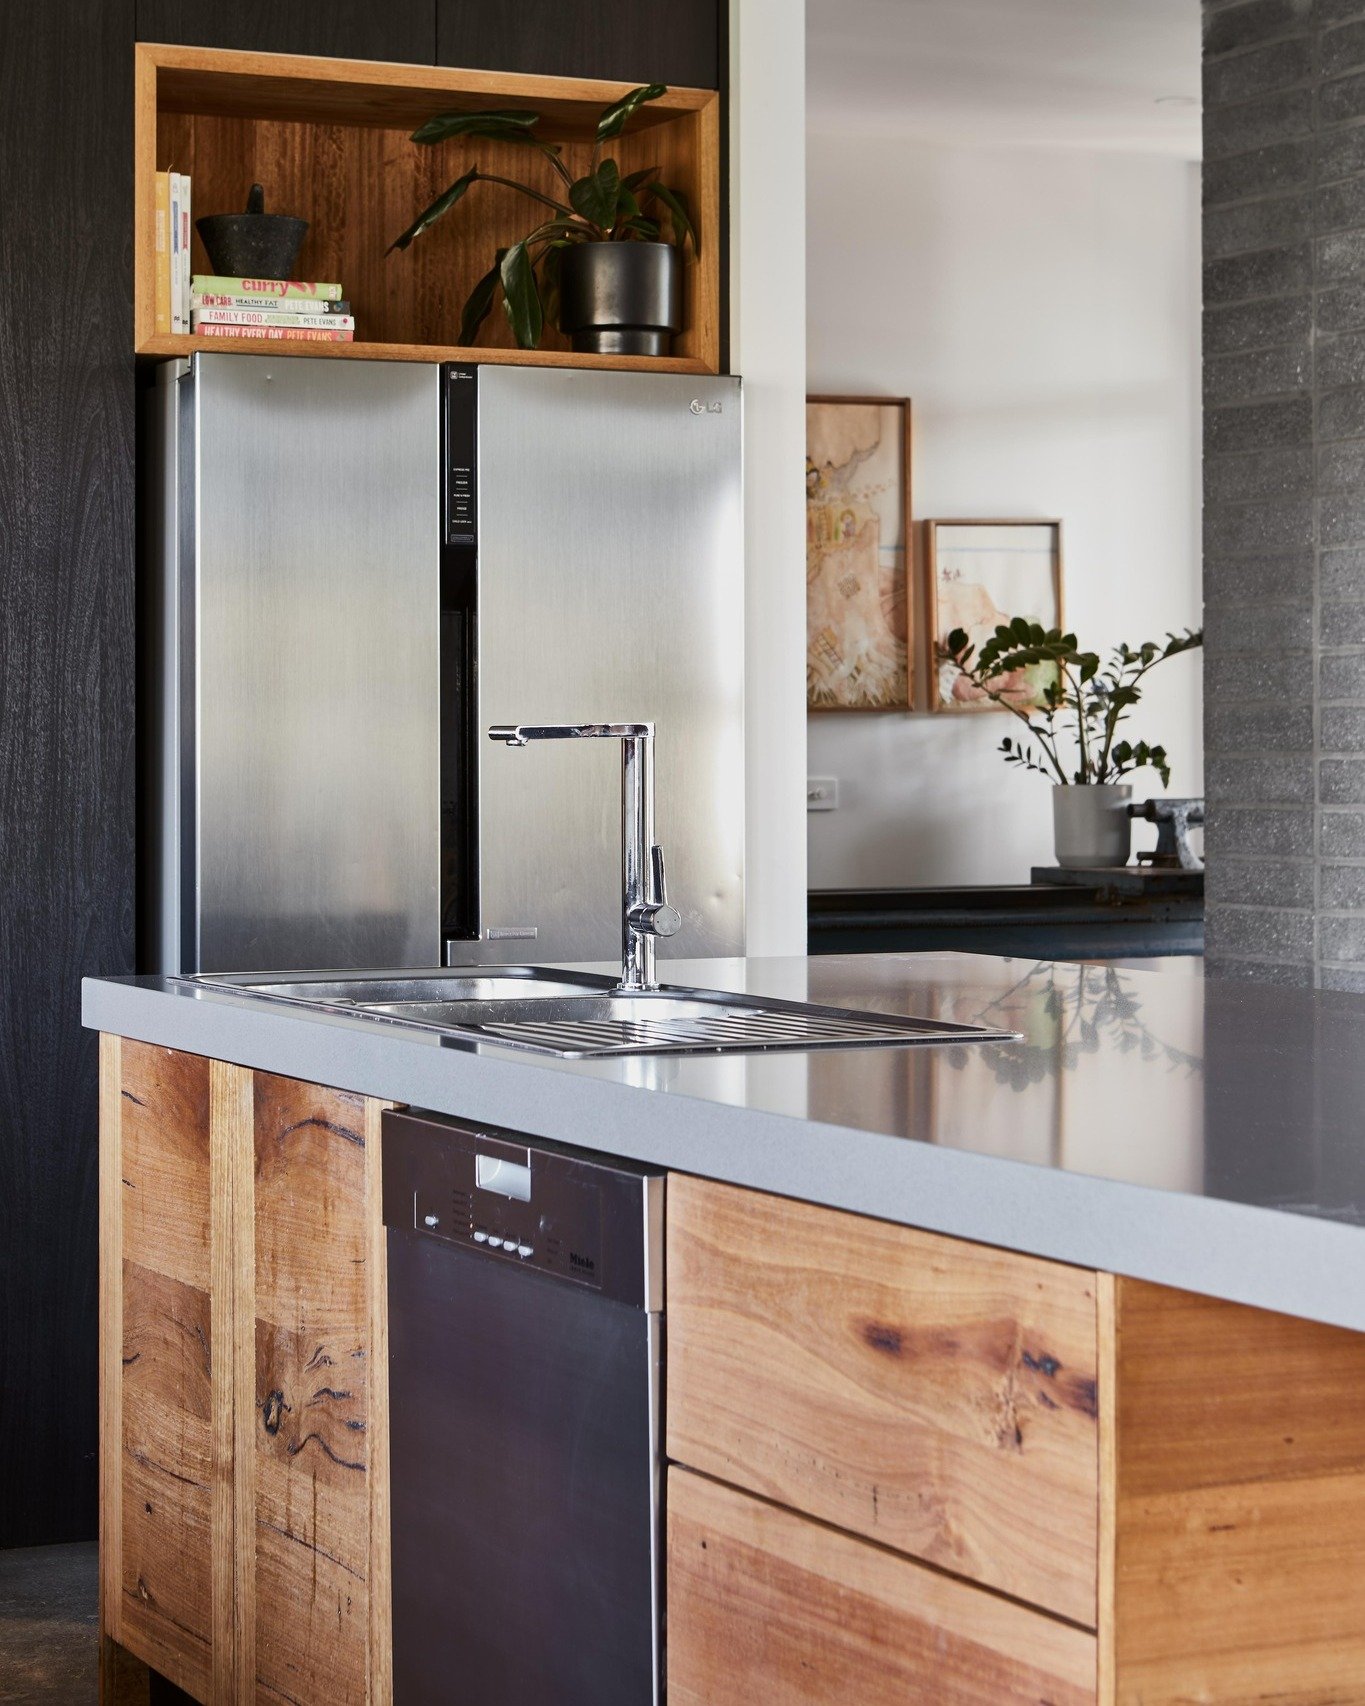 The beautiful Luxe Industrial combination of timber, gray and black... Love how the pops of Messmate timber used throughout this kitchen space brings life to the palette of materials! #kitchendesign #woodenkitchen